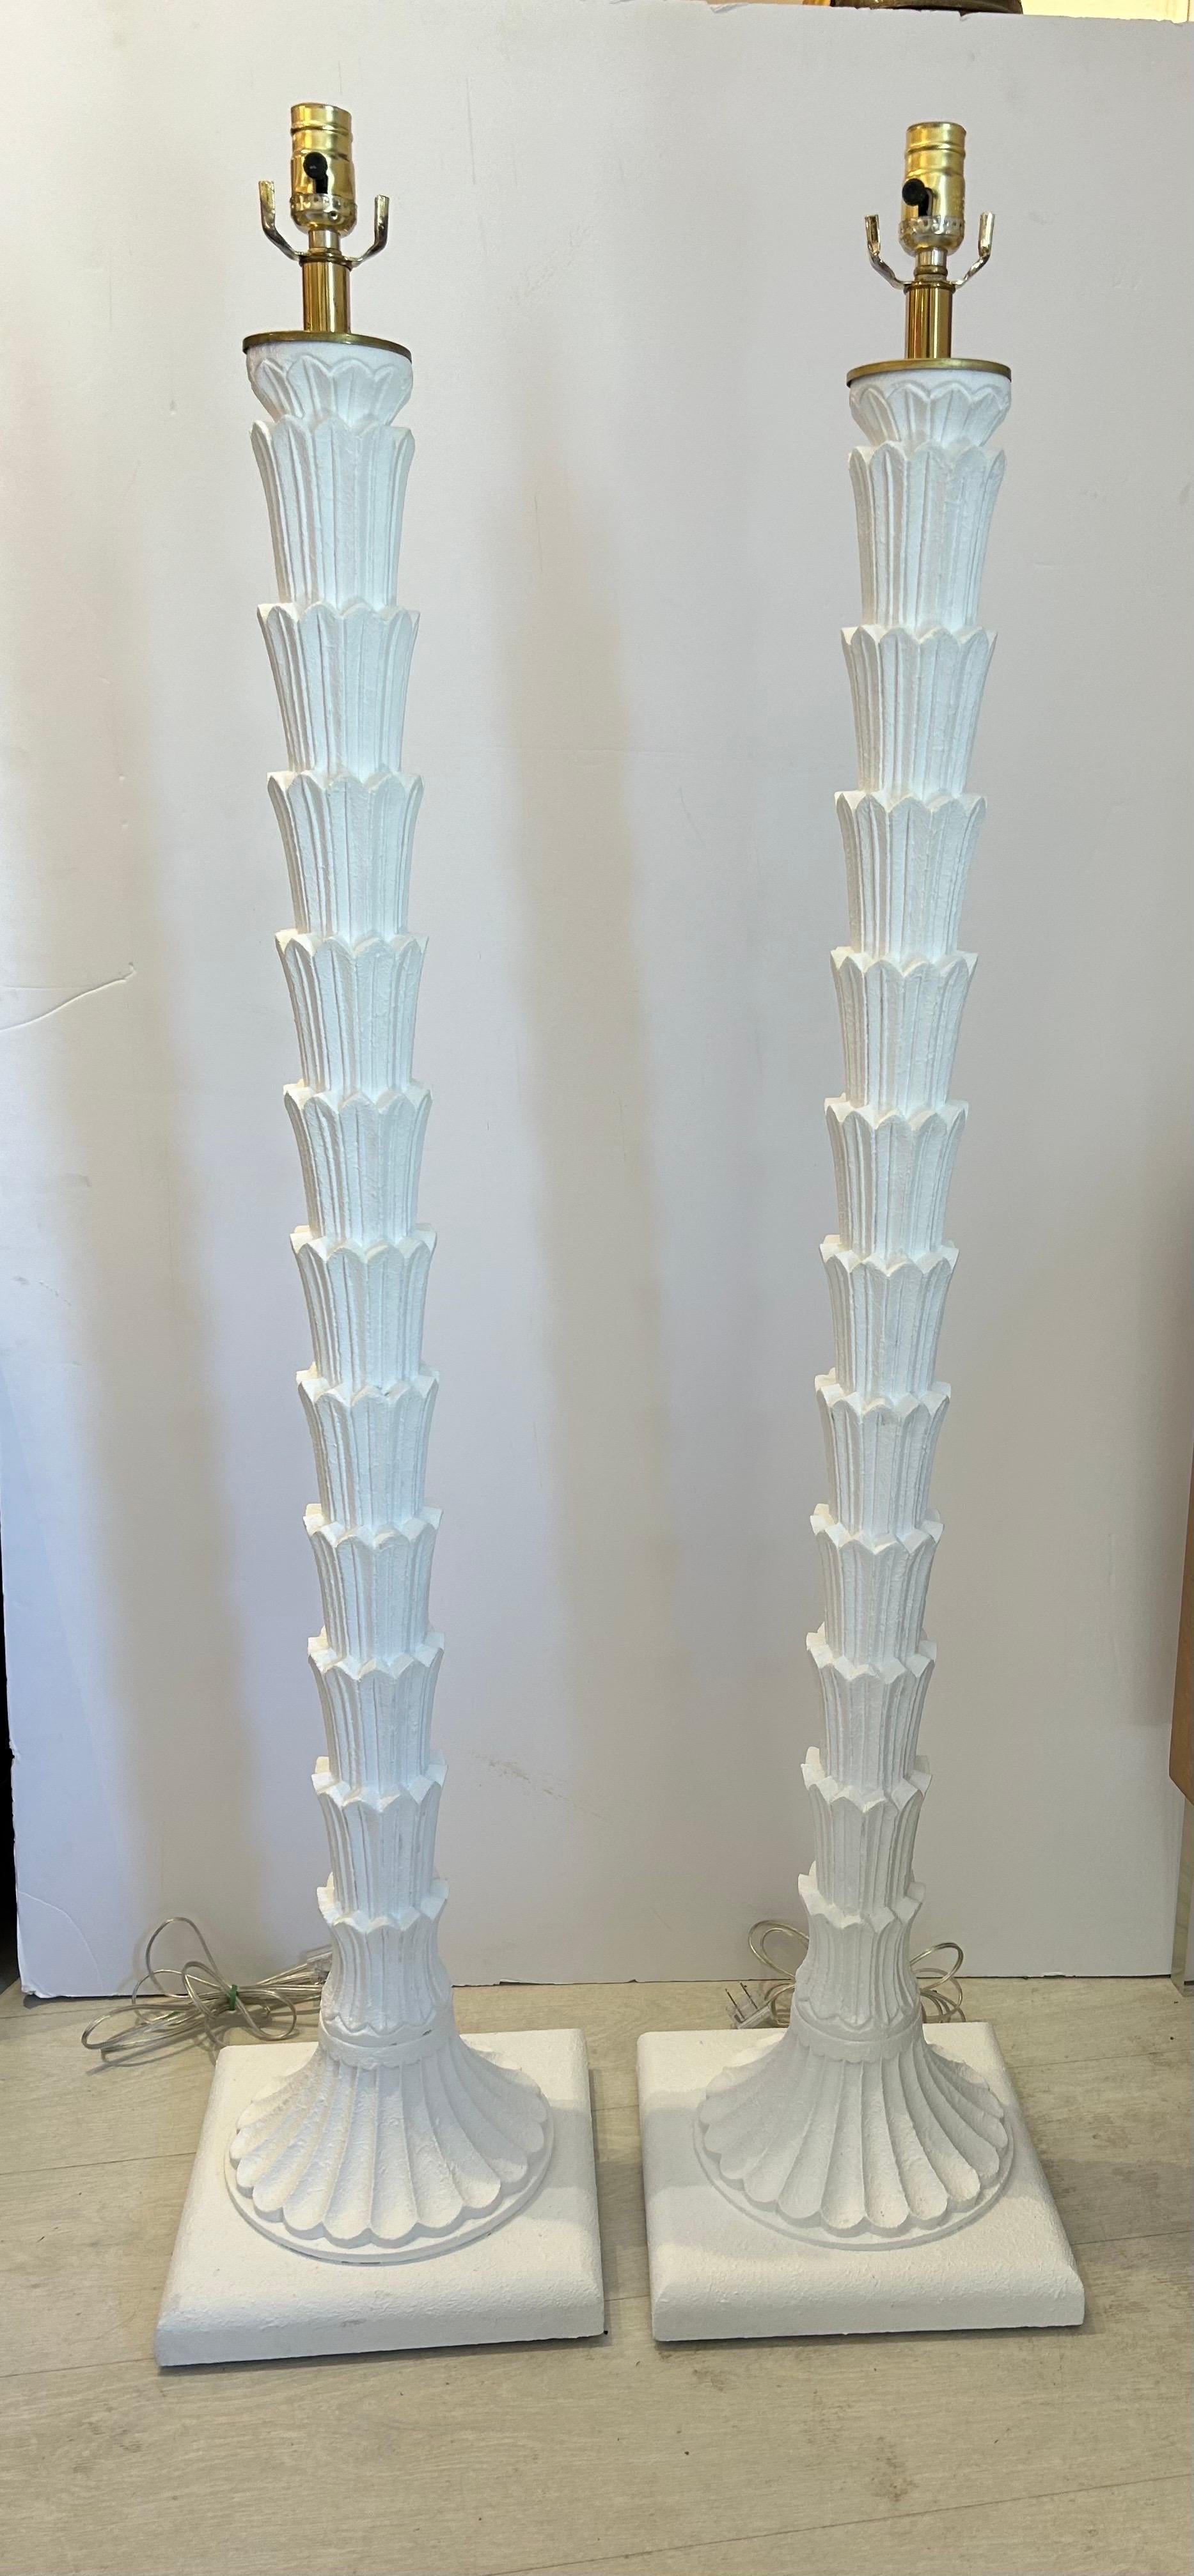 52.5 inches tall on a 10.5“ x 10.5“base.. white palmette floor lamps recently painted in gesso  finish and re-stored… Brass hardware in very good condition